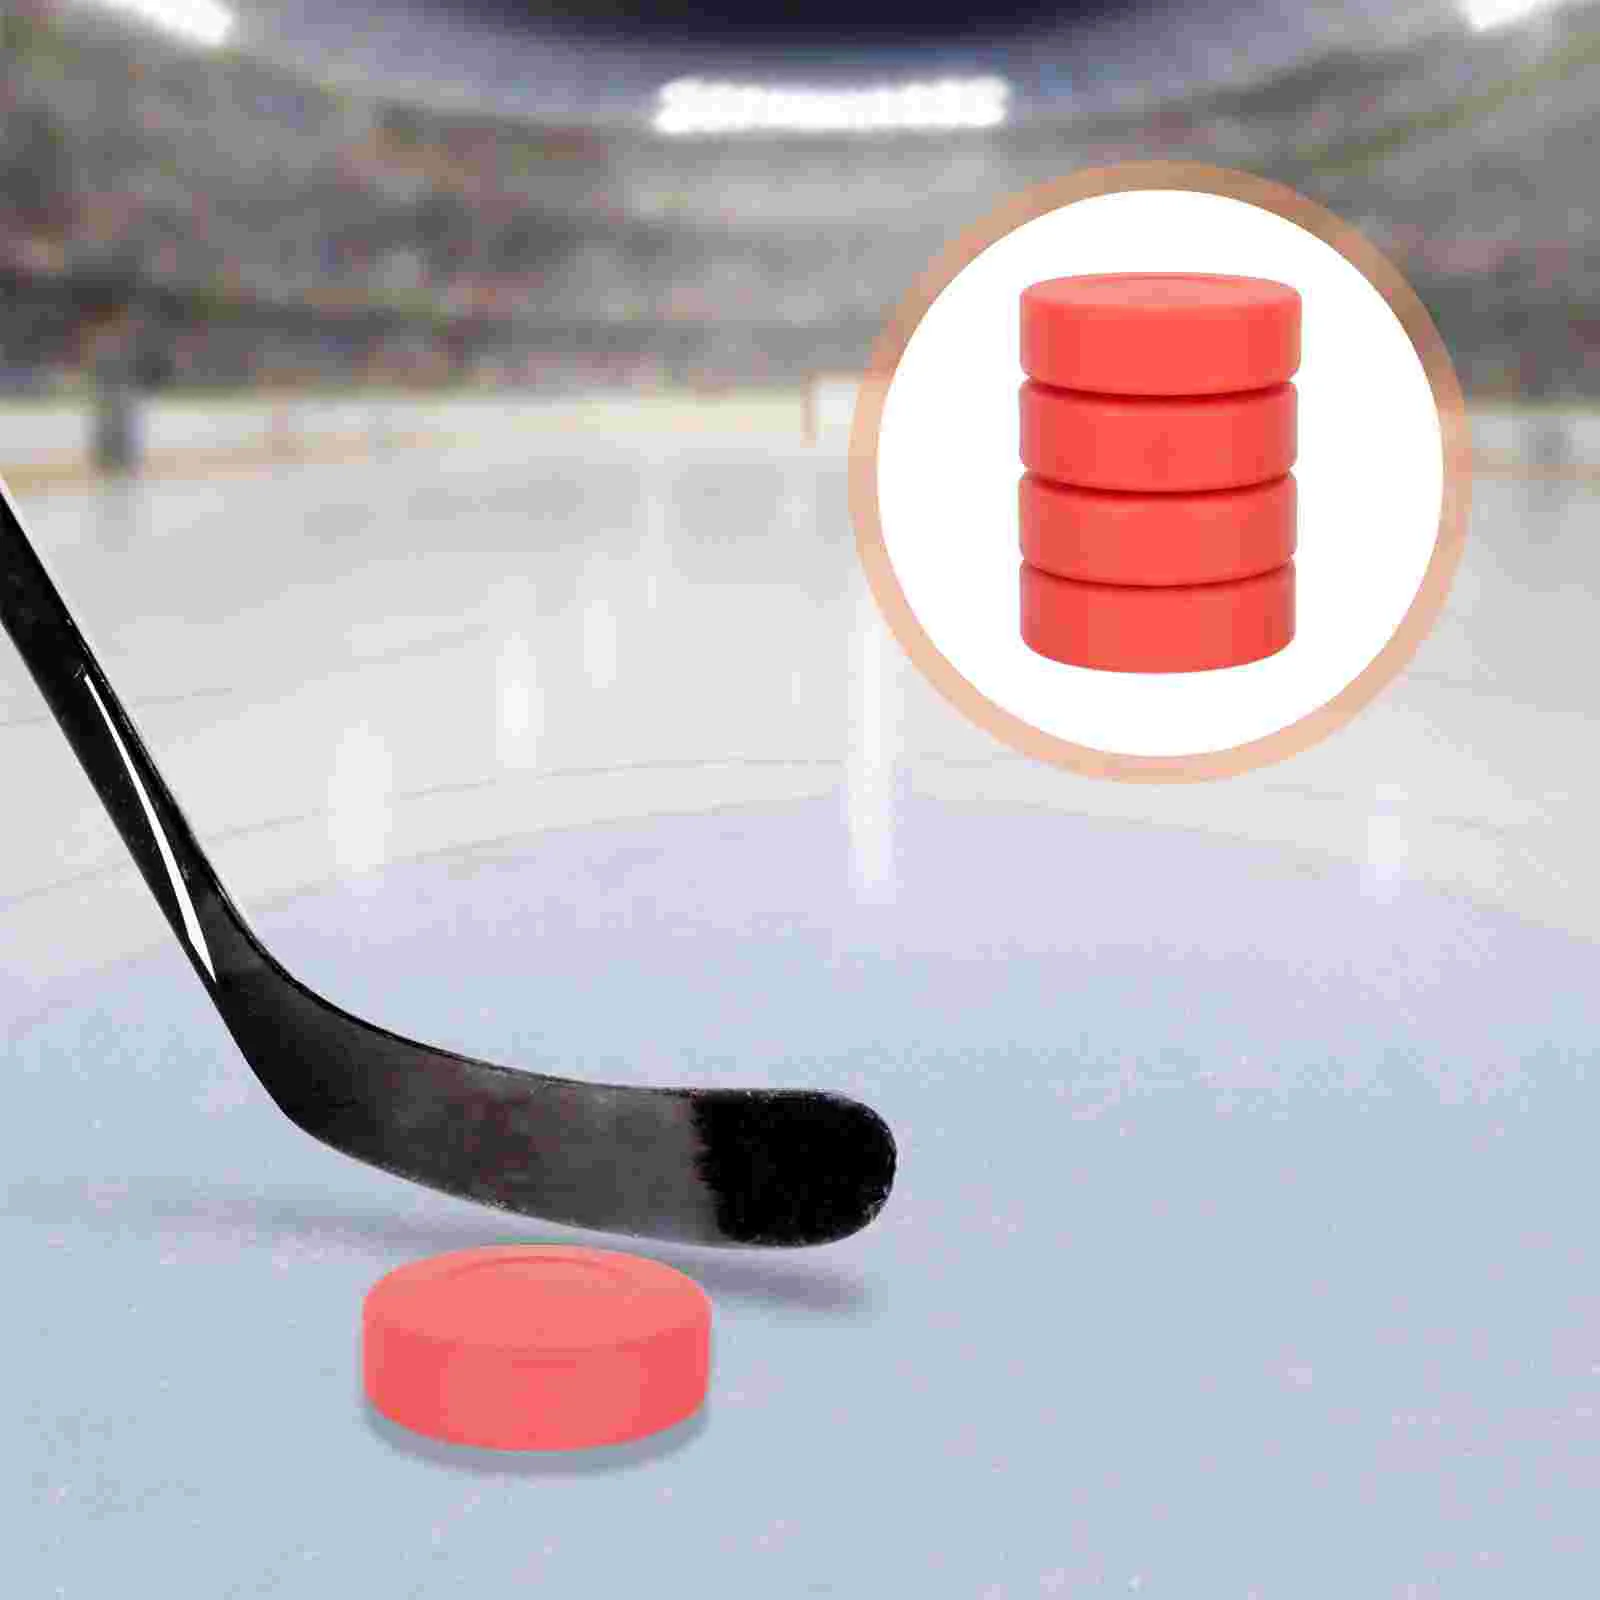 

Hockey Puck Pucks Ice Training Practicing Rubber Accessory Supplies Sports Outdoor Game Equipment Official Roller Air